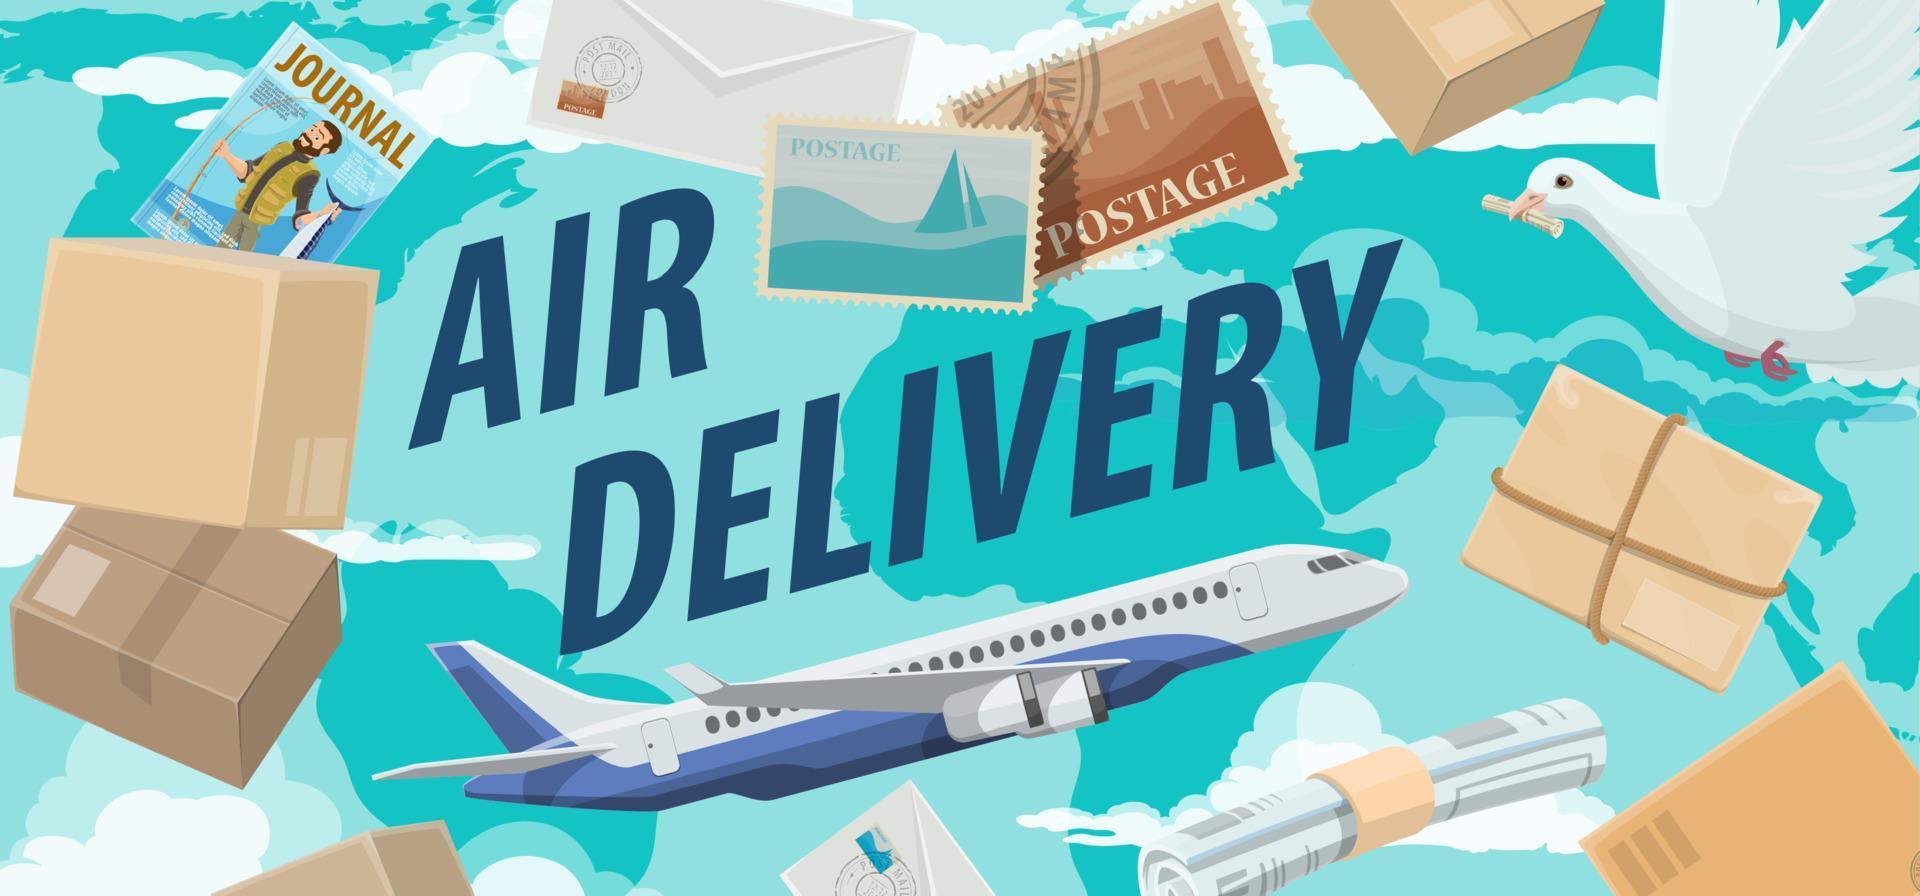 Parcels, letters air mail, avia delivery service vector